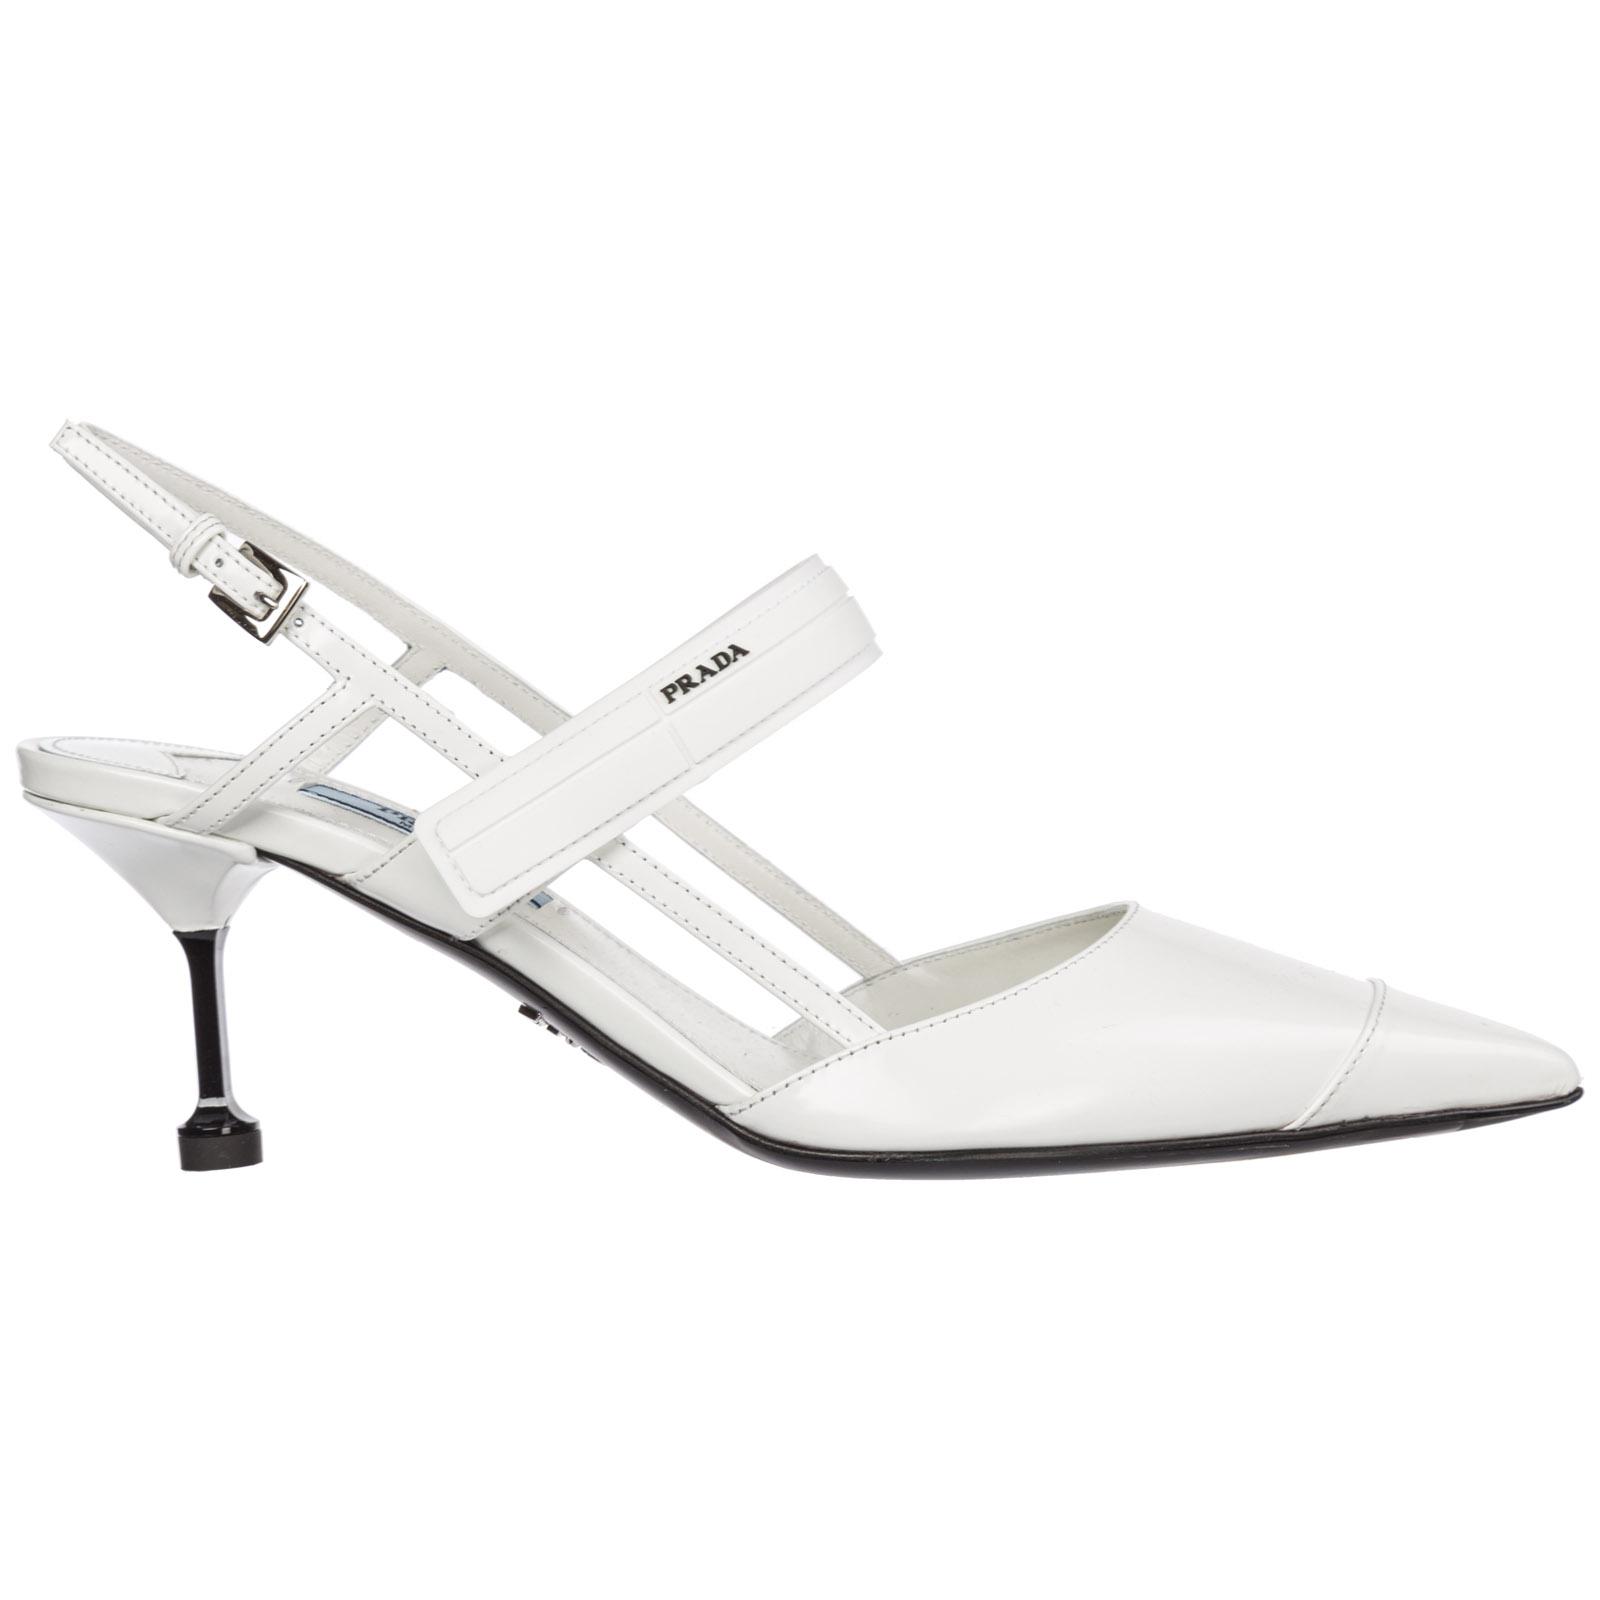 Prada Leather Pumps Court Shoes High Heel in White | Lyst